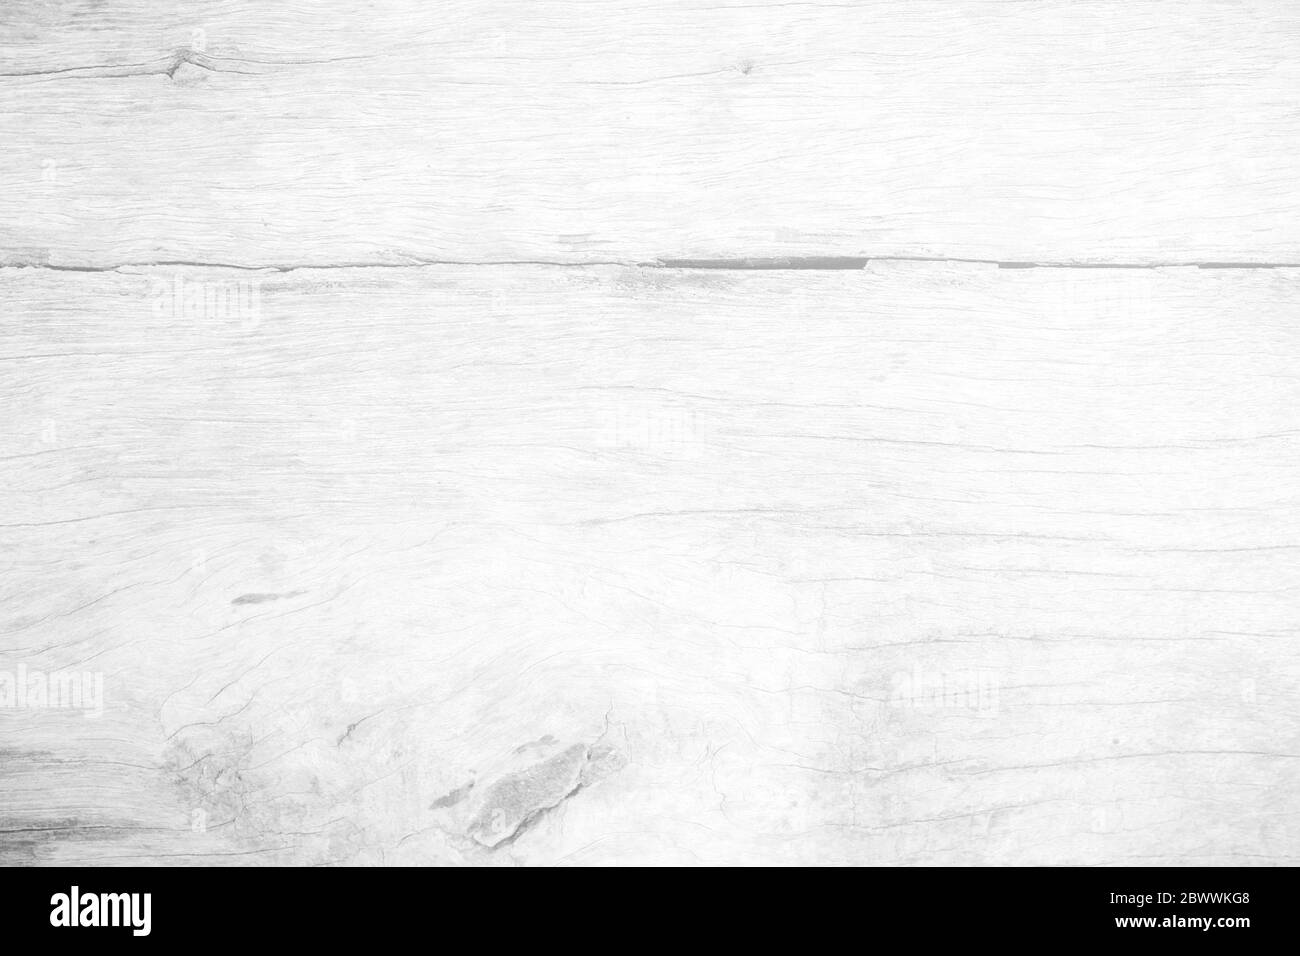 Old White Wooden Board Texture Background. Stock Photo